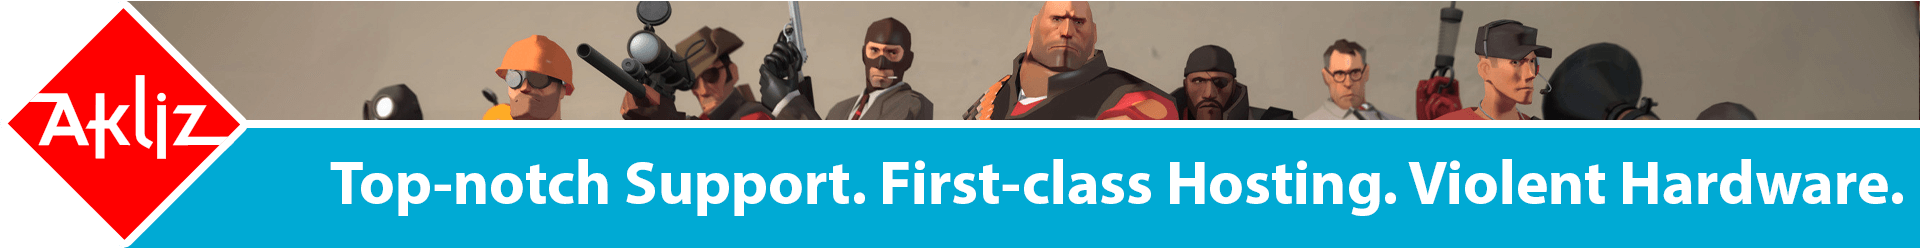 Team Fortress 2 Banner